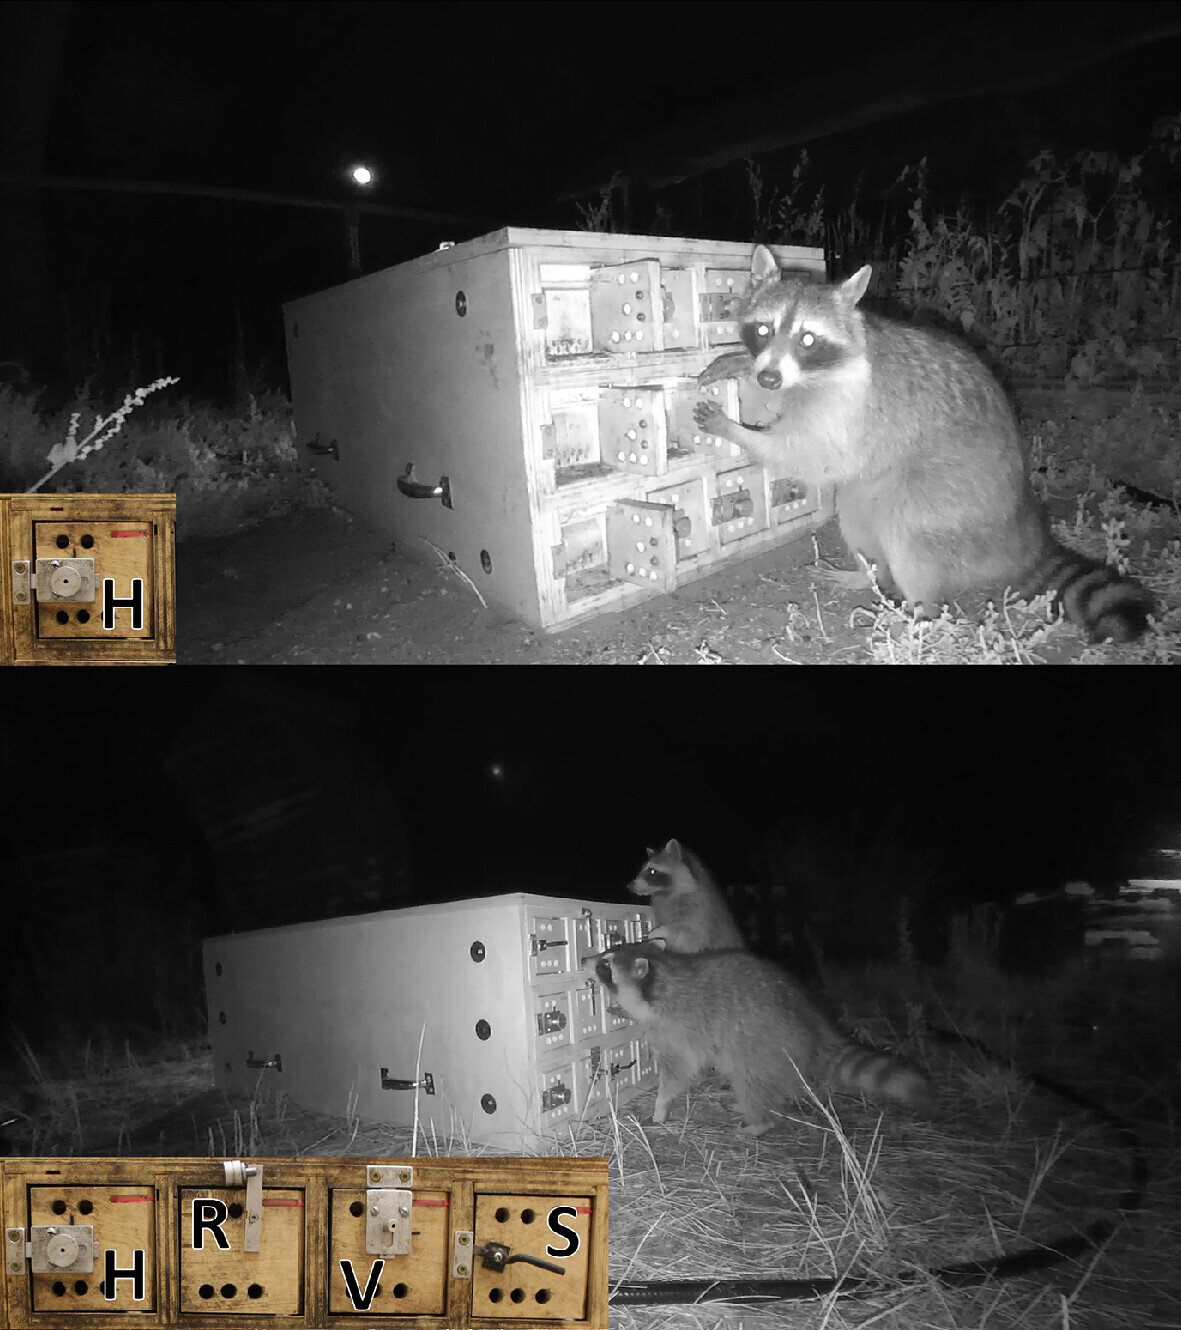 Wild raccoons are flexible learners, puzzle box study shows